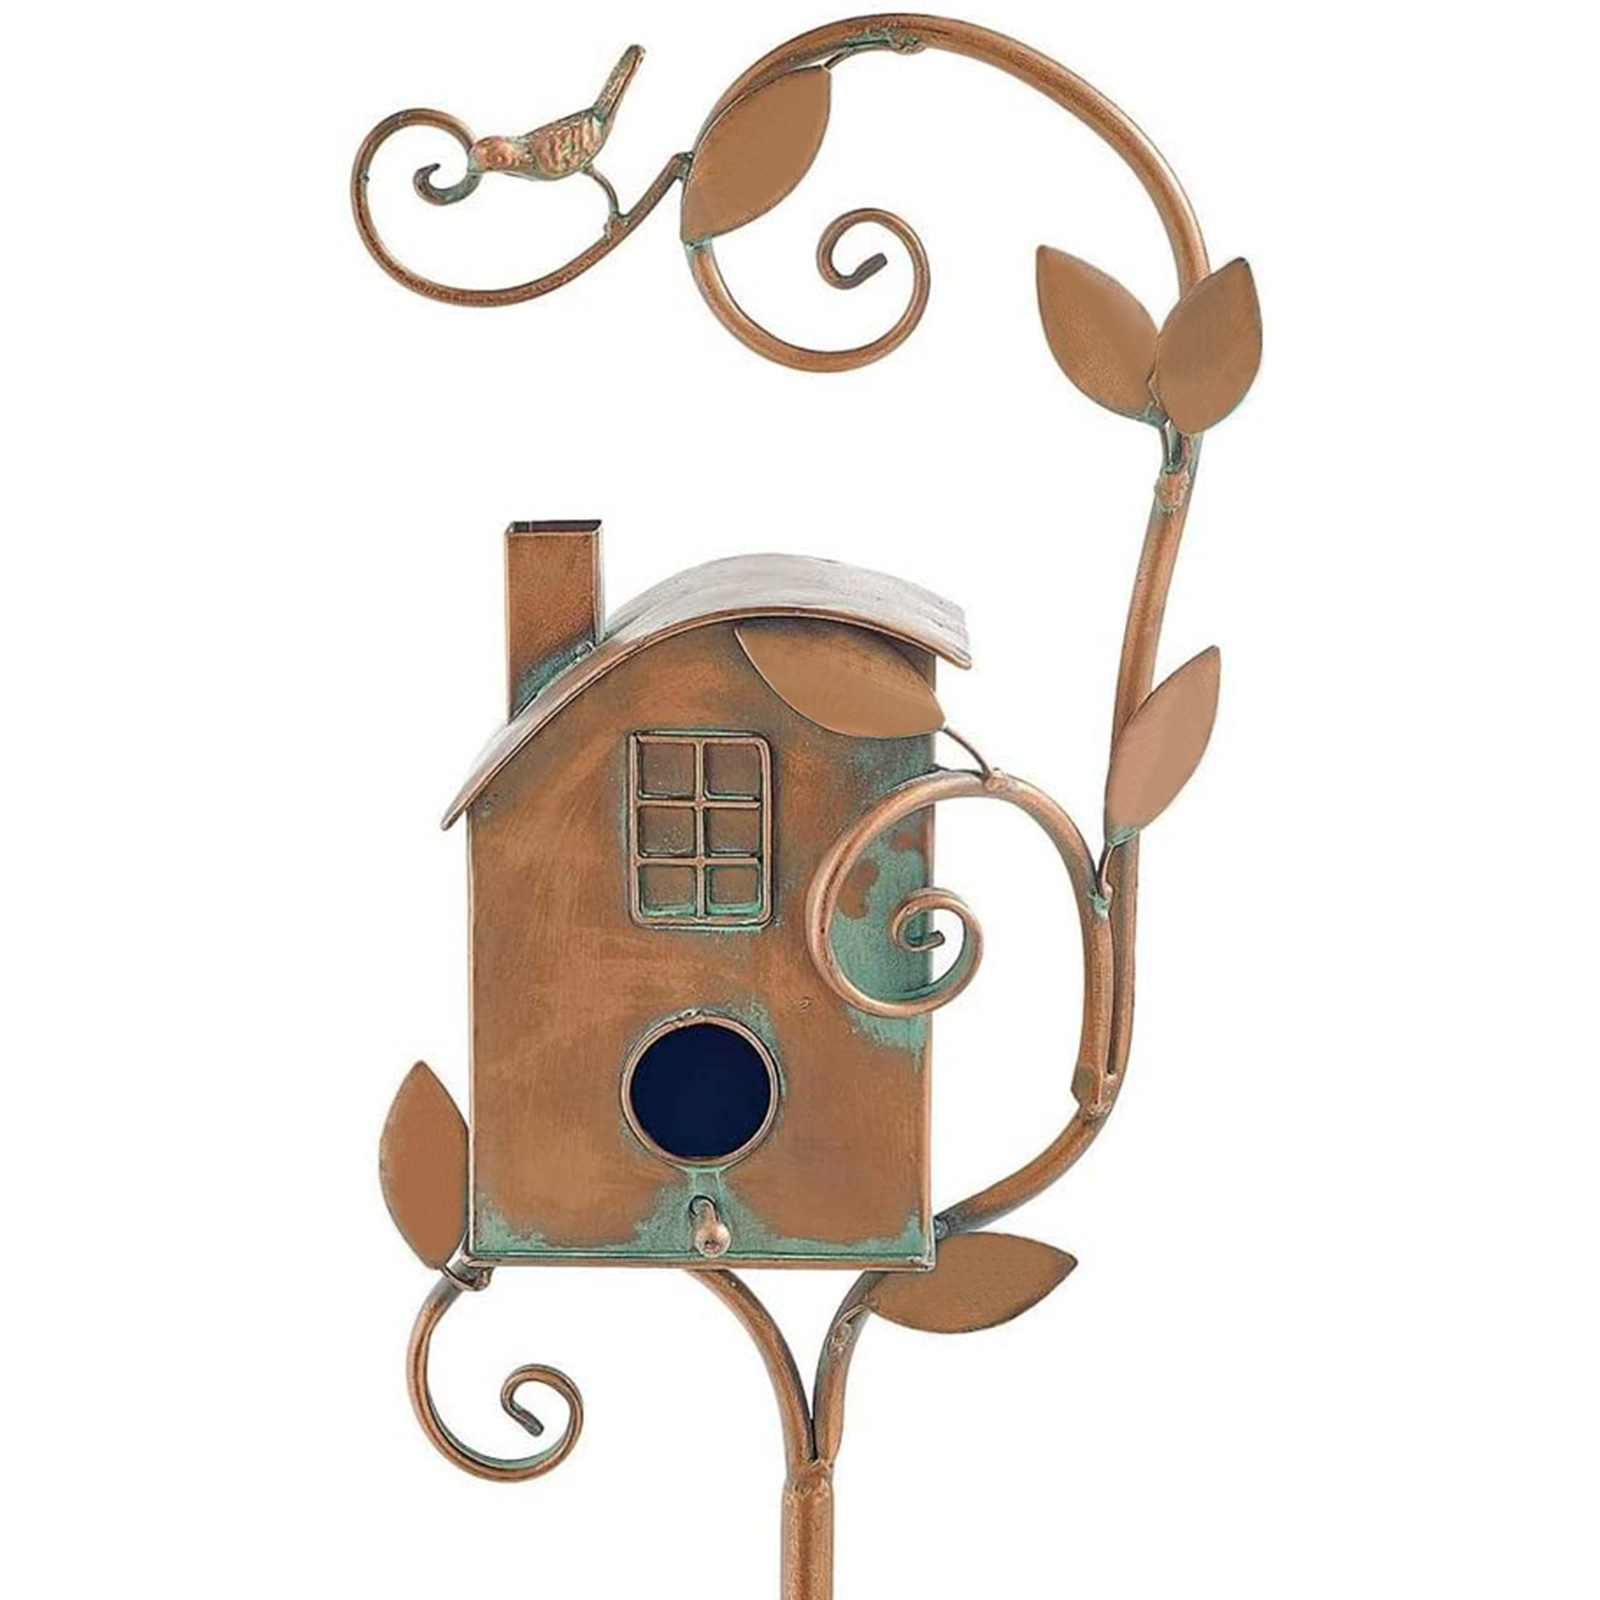 Asdomo Metal Birdhouse Garden Stakes Bird's Nest Multi-size Yellow Easy To Assemble Resting Place For Birds - image 1 of 8